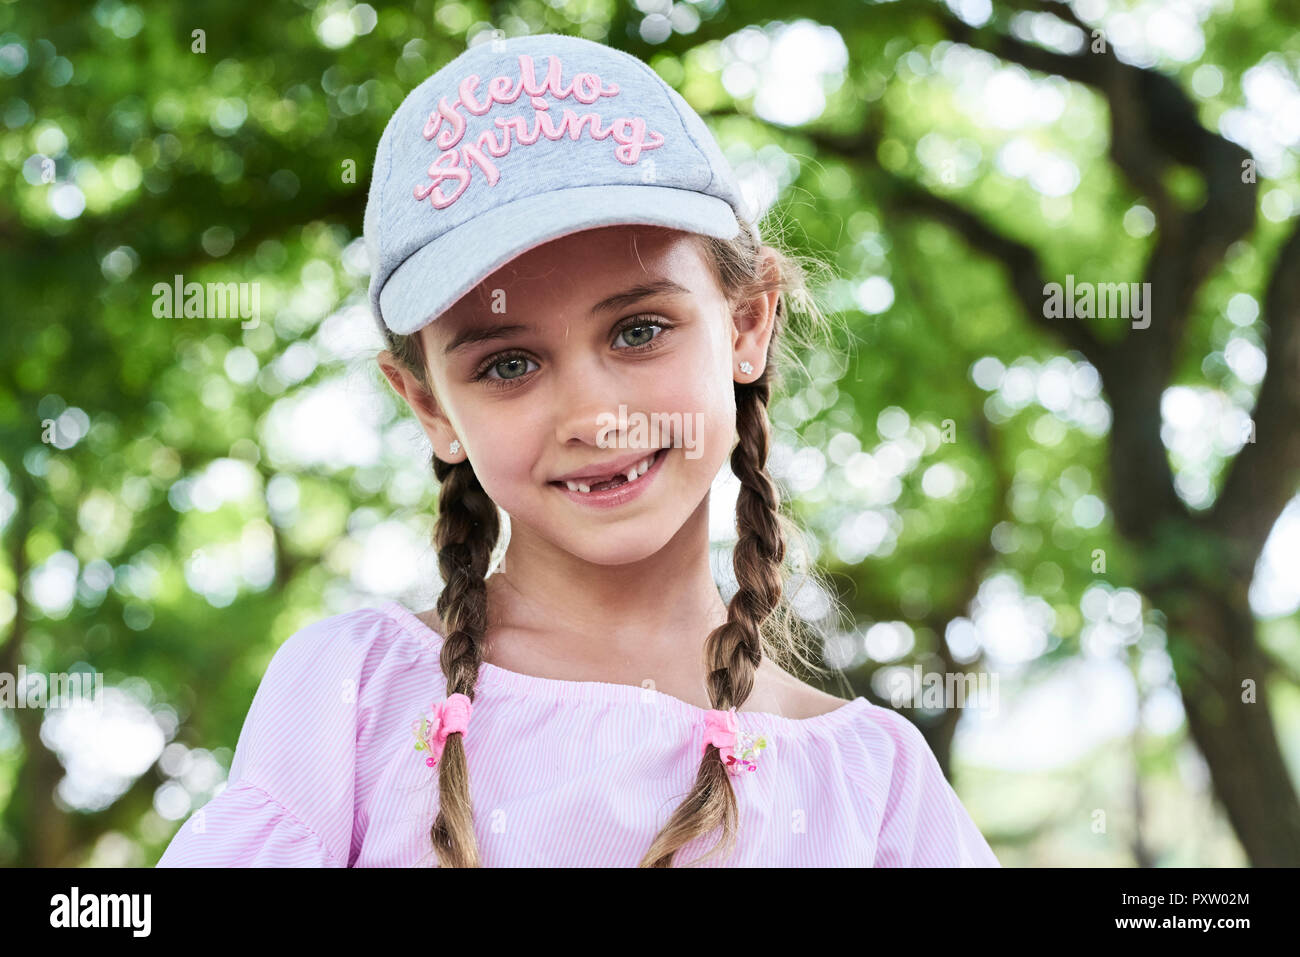 Portrait of little girl with green eyes braids and cap, smiling Stock Photo